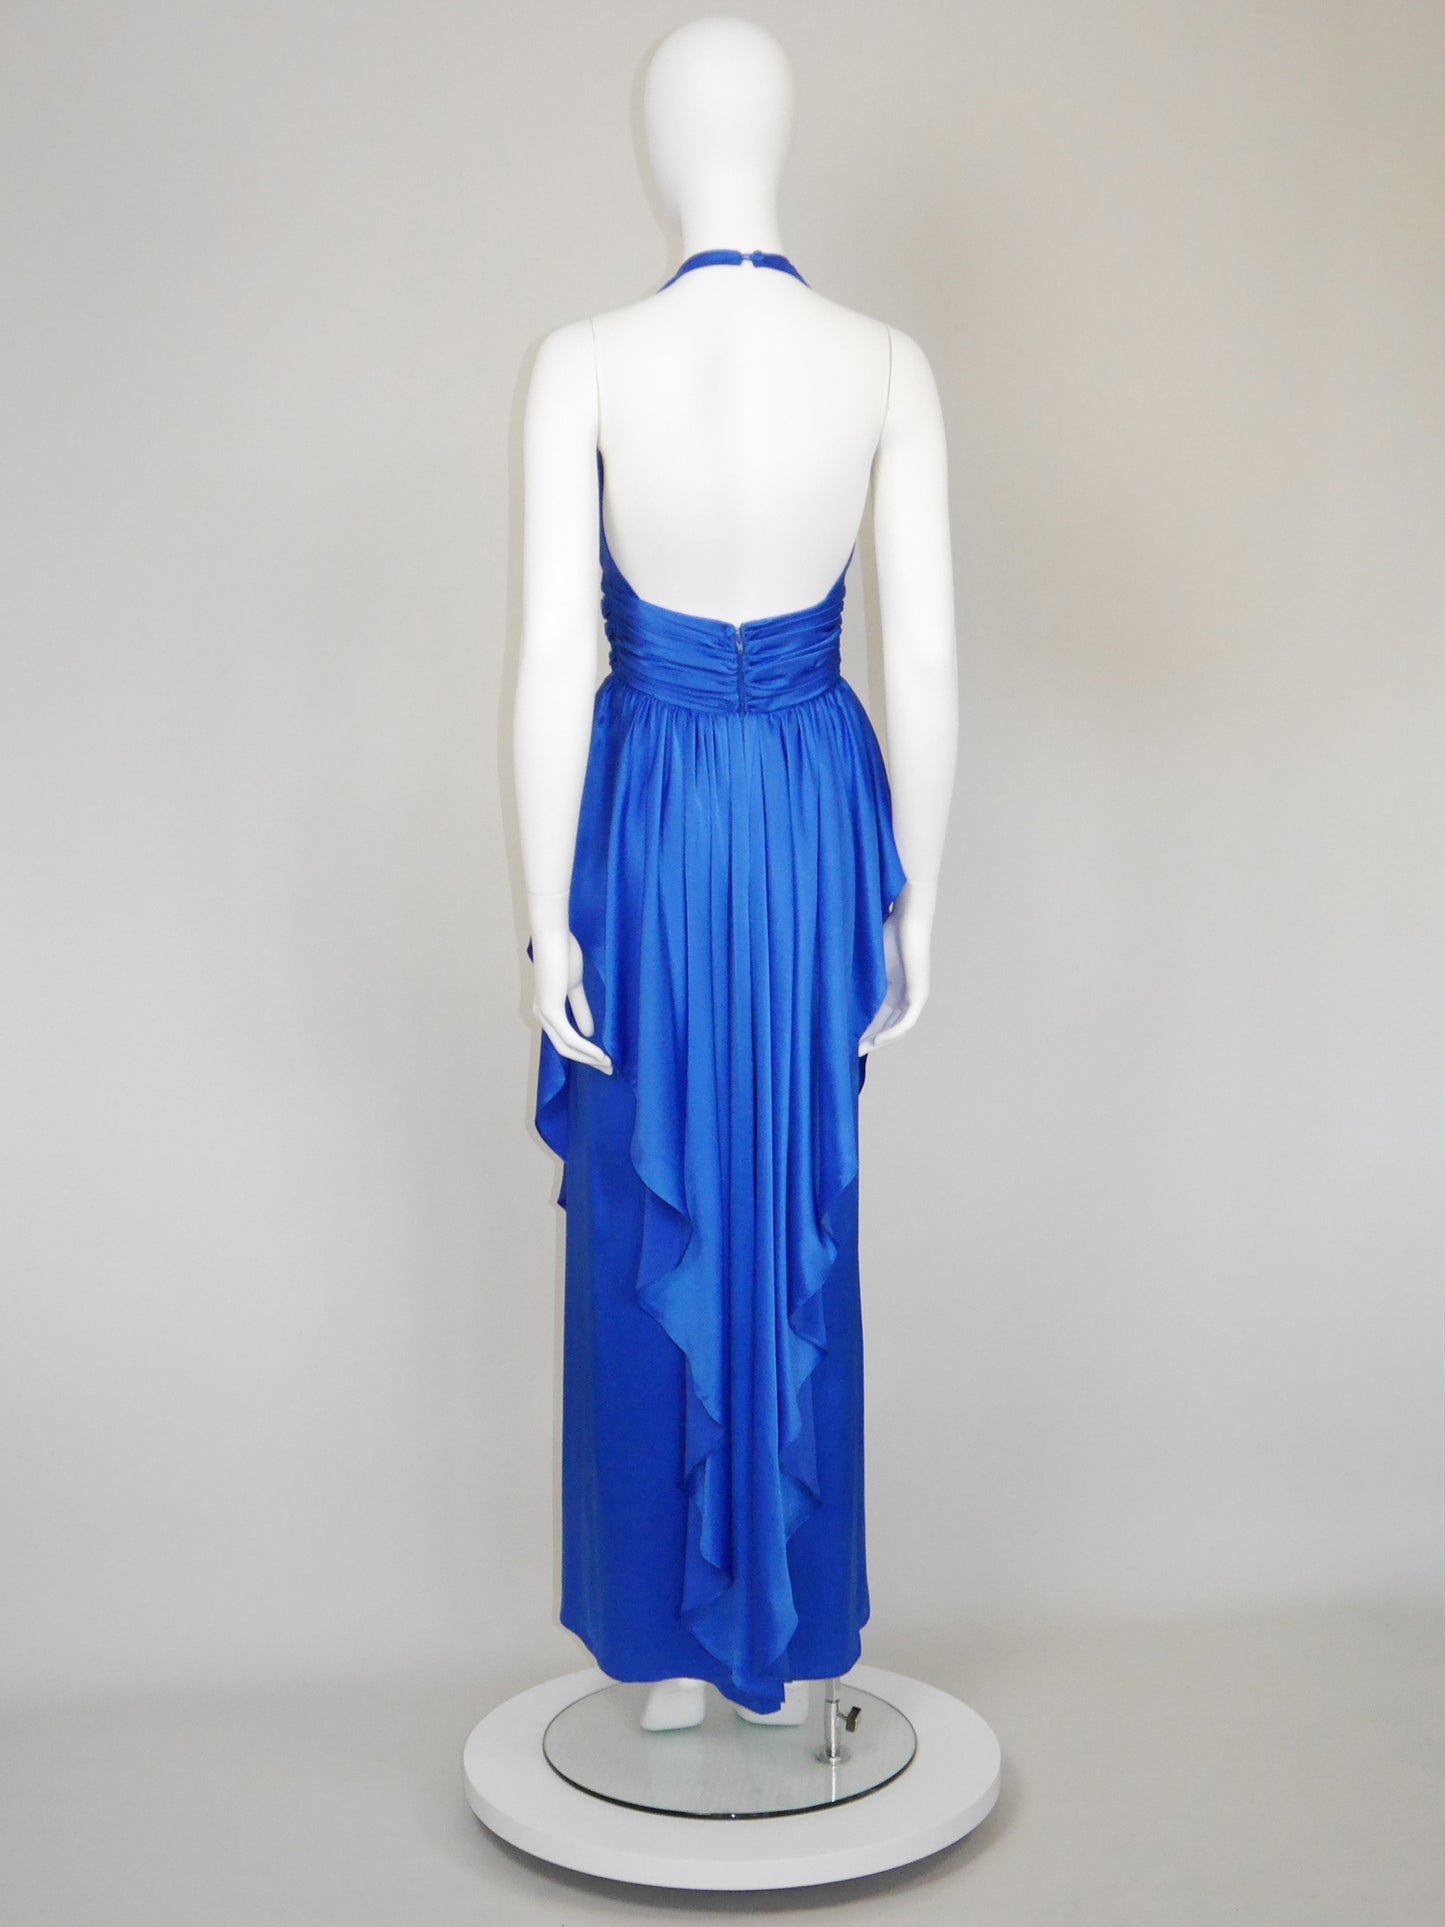 FRANK USHER London 1980s Vintage Electric Blue Maxi Evening Goddess Gown Size XS